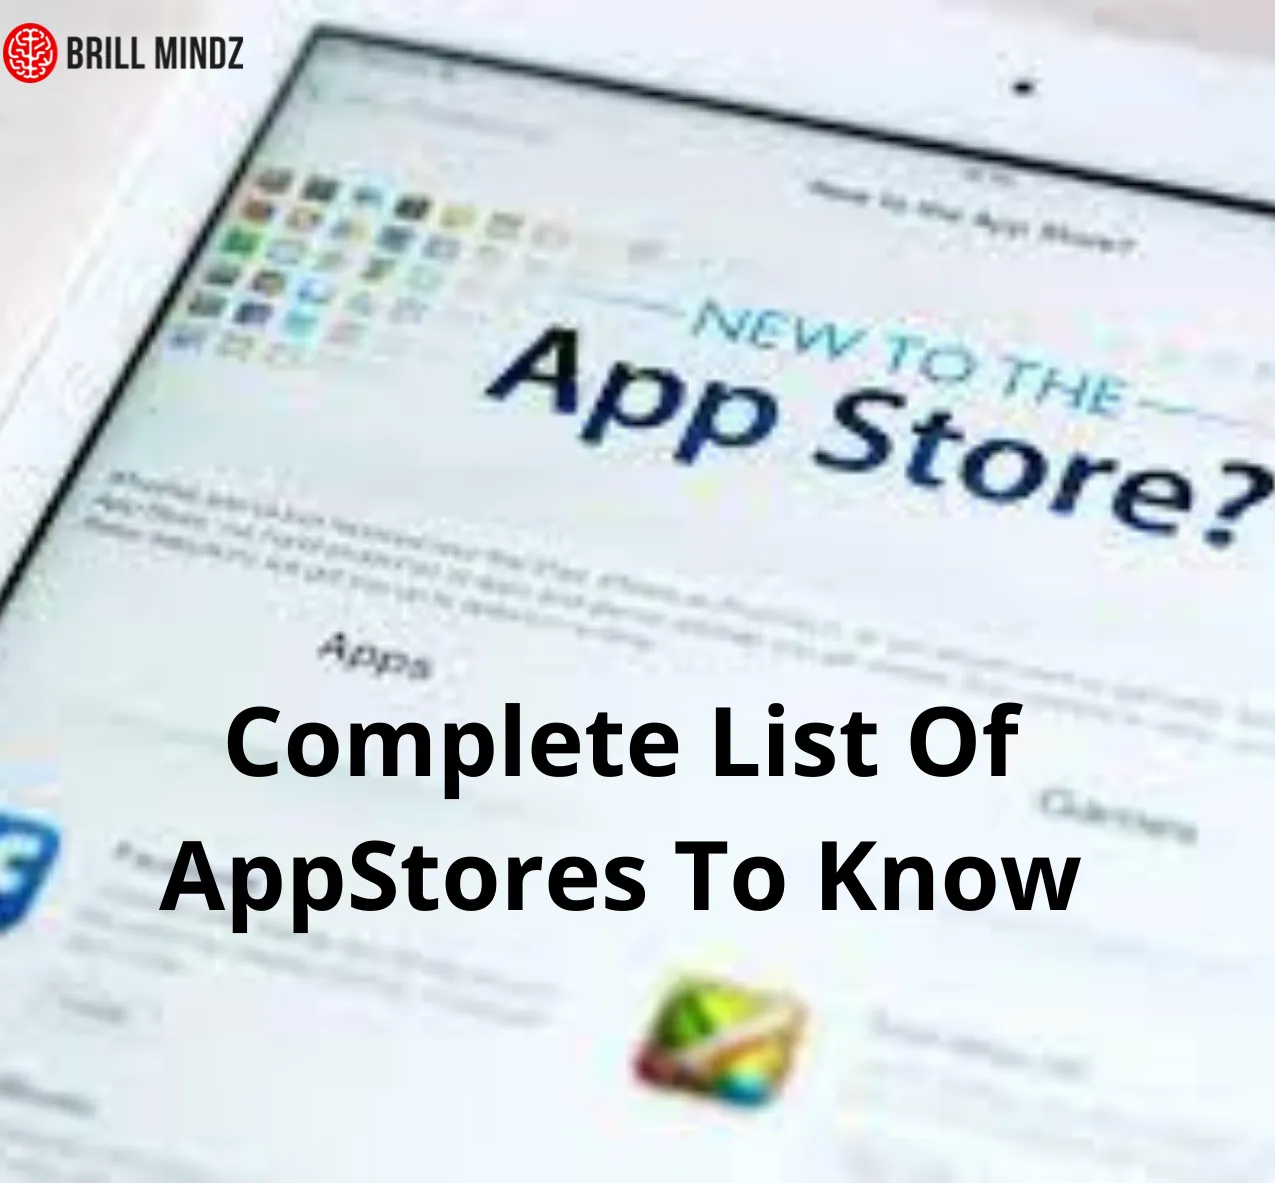 Preferred List Of AppStore You Should Upload the Mobile Apps